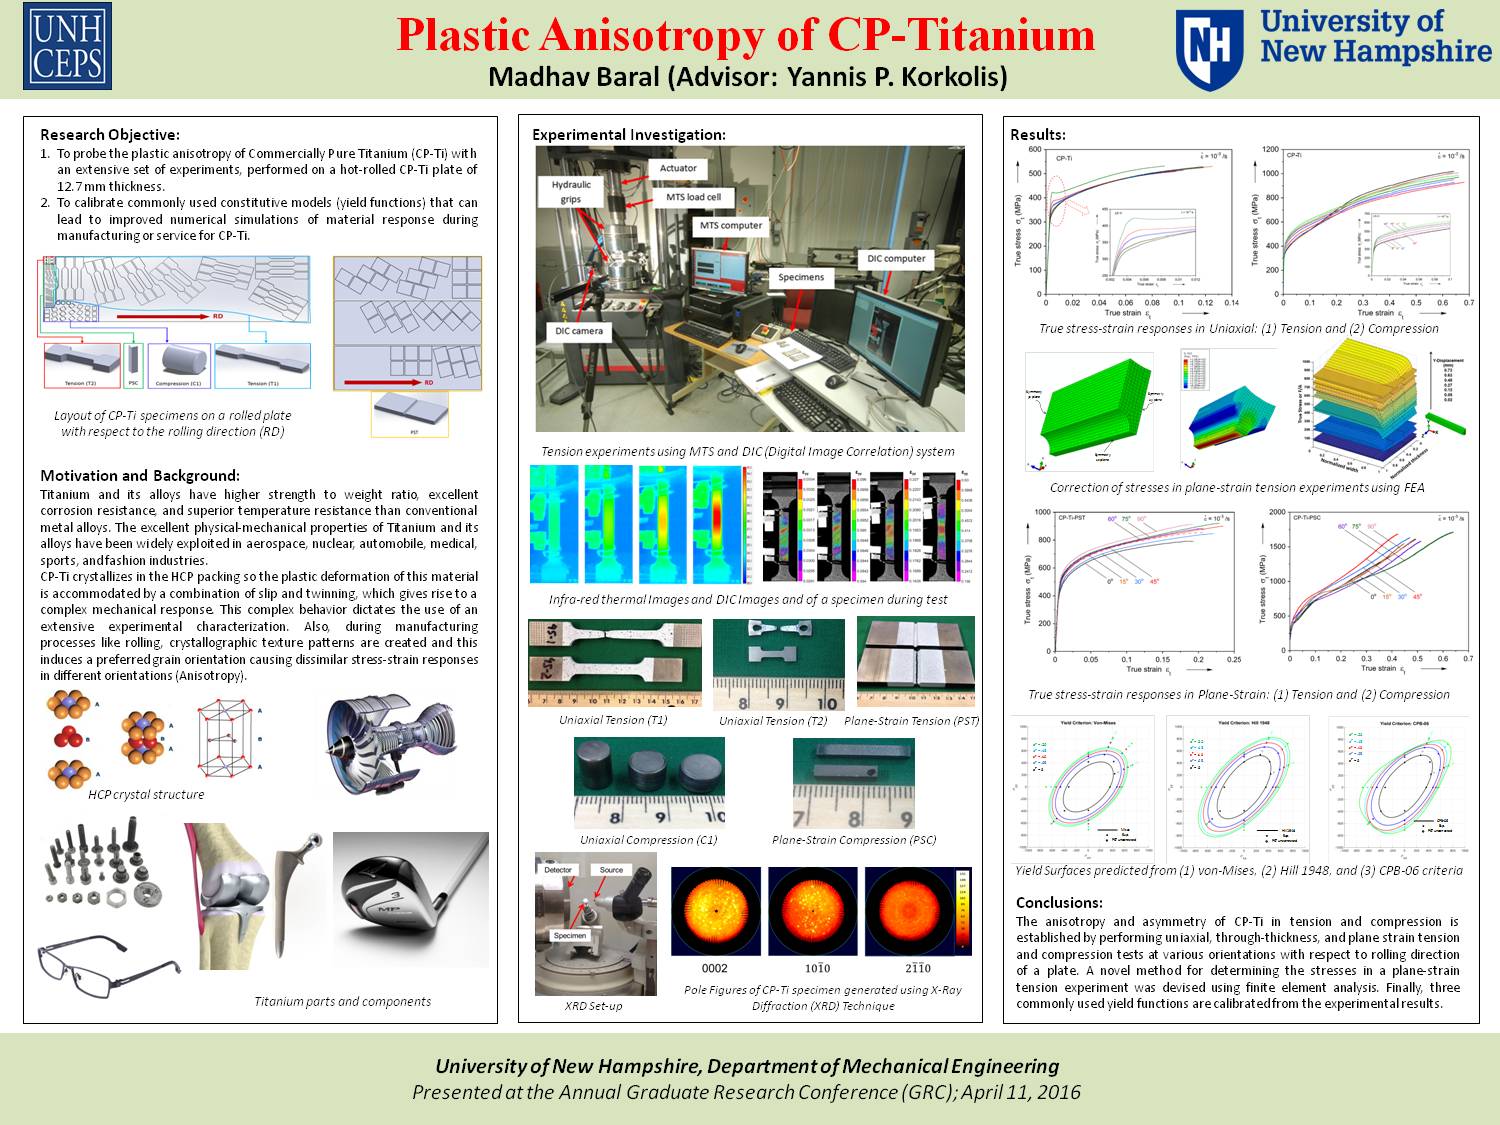 Plastic Anisotropy Of Cp-Titanium by madhavbaral1988